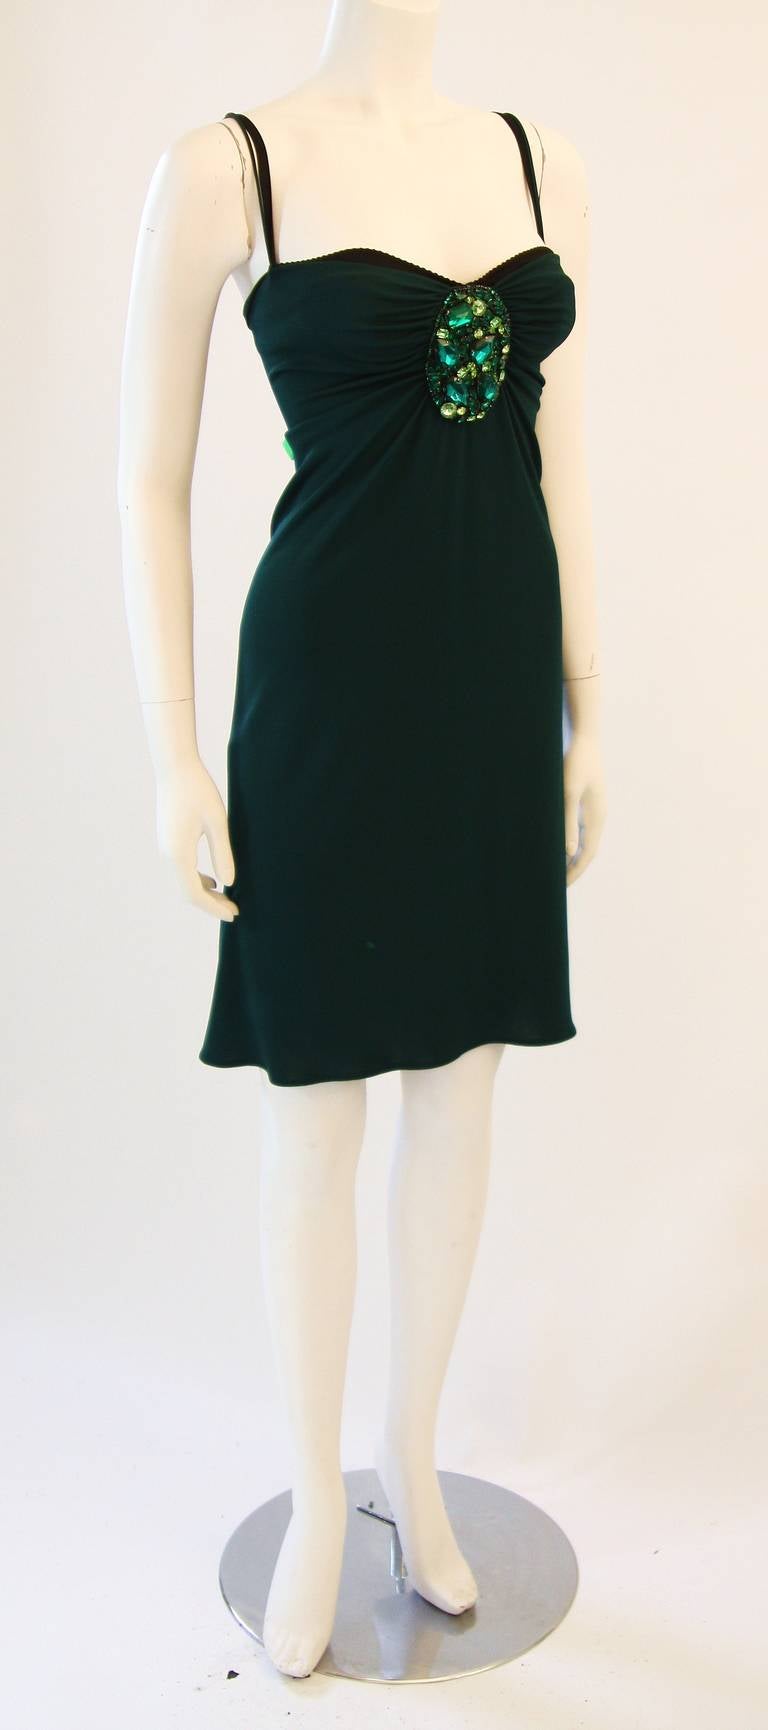 Women's Dolce and Gabbana Green Jersey Dress with Rhinestones Size 44